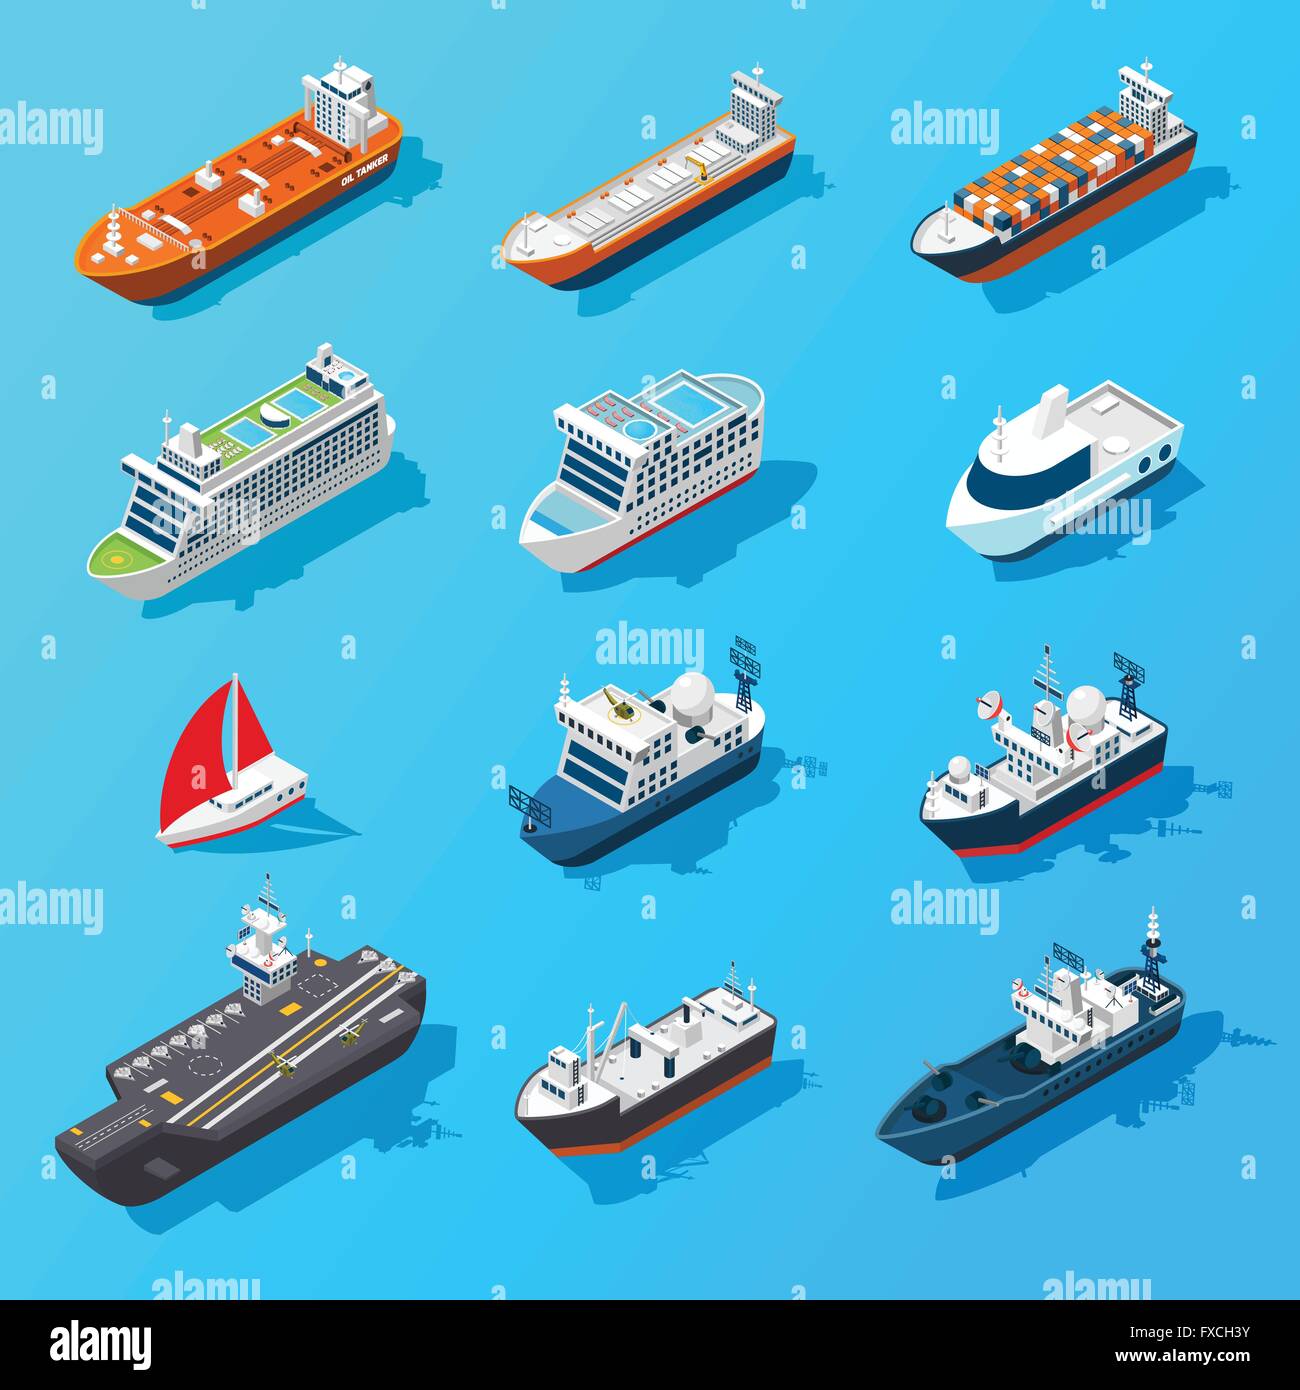 Ships Boats Vessels Isometric Icon Set Stock Vector